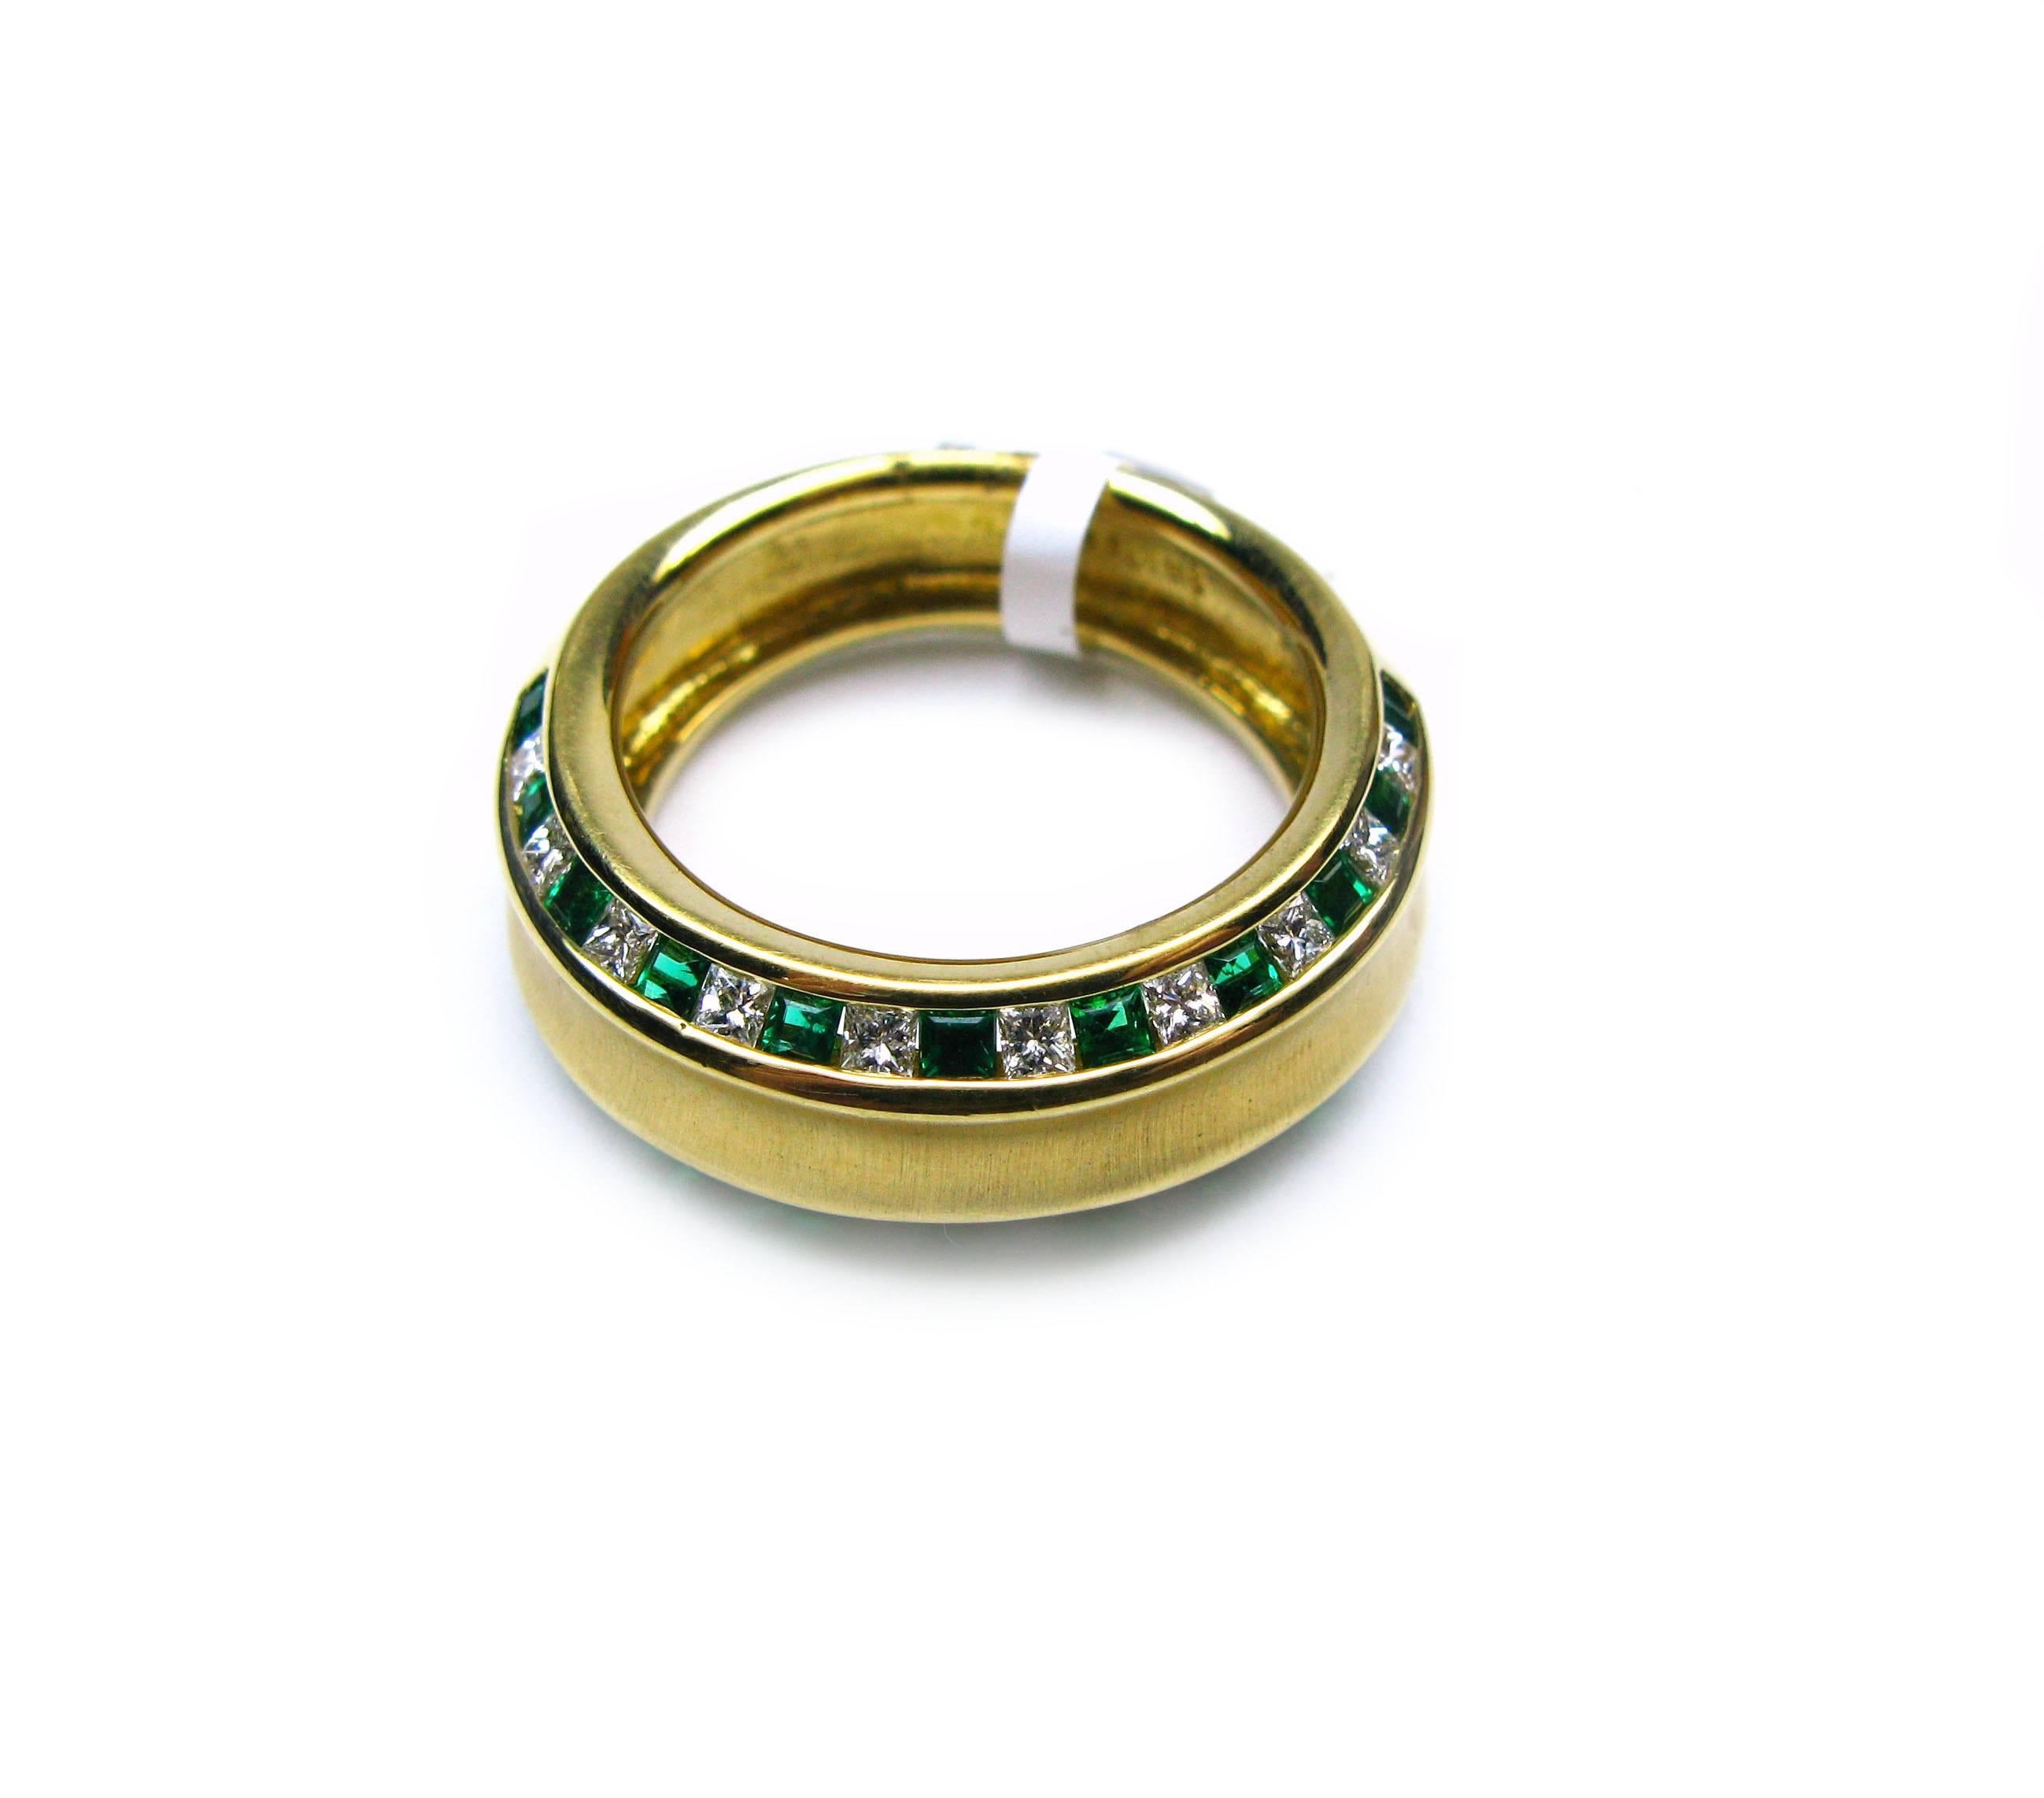 This lovely 18kt yellow gold Kurt Wayne ring features both a brush and high polish finish with two rows of alternating princess cut green emeralds totaling 0.63cts and princess cut diamonds totaling 0.51cts. This is the perfect piece to wear as